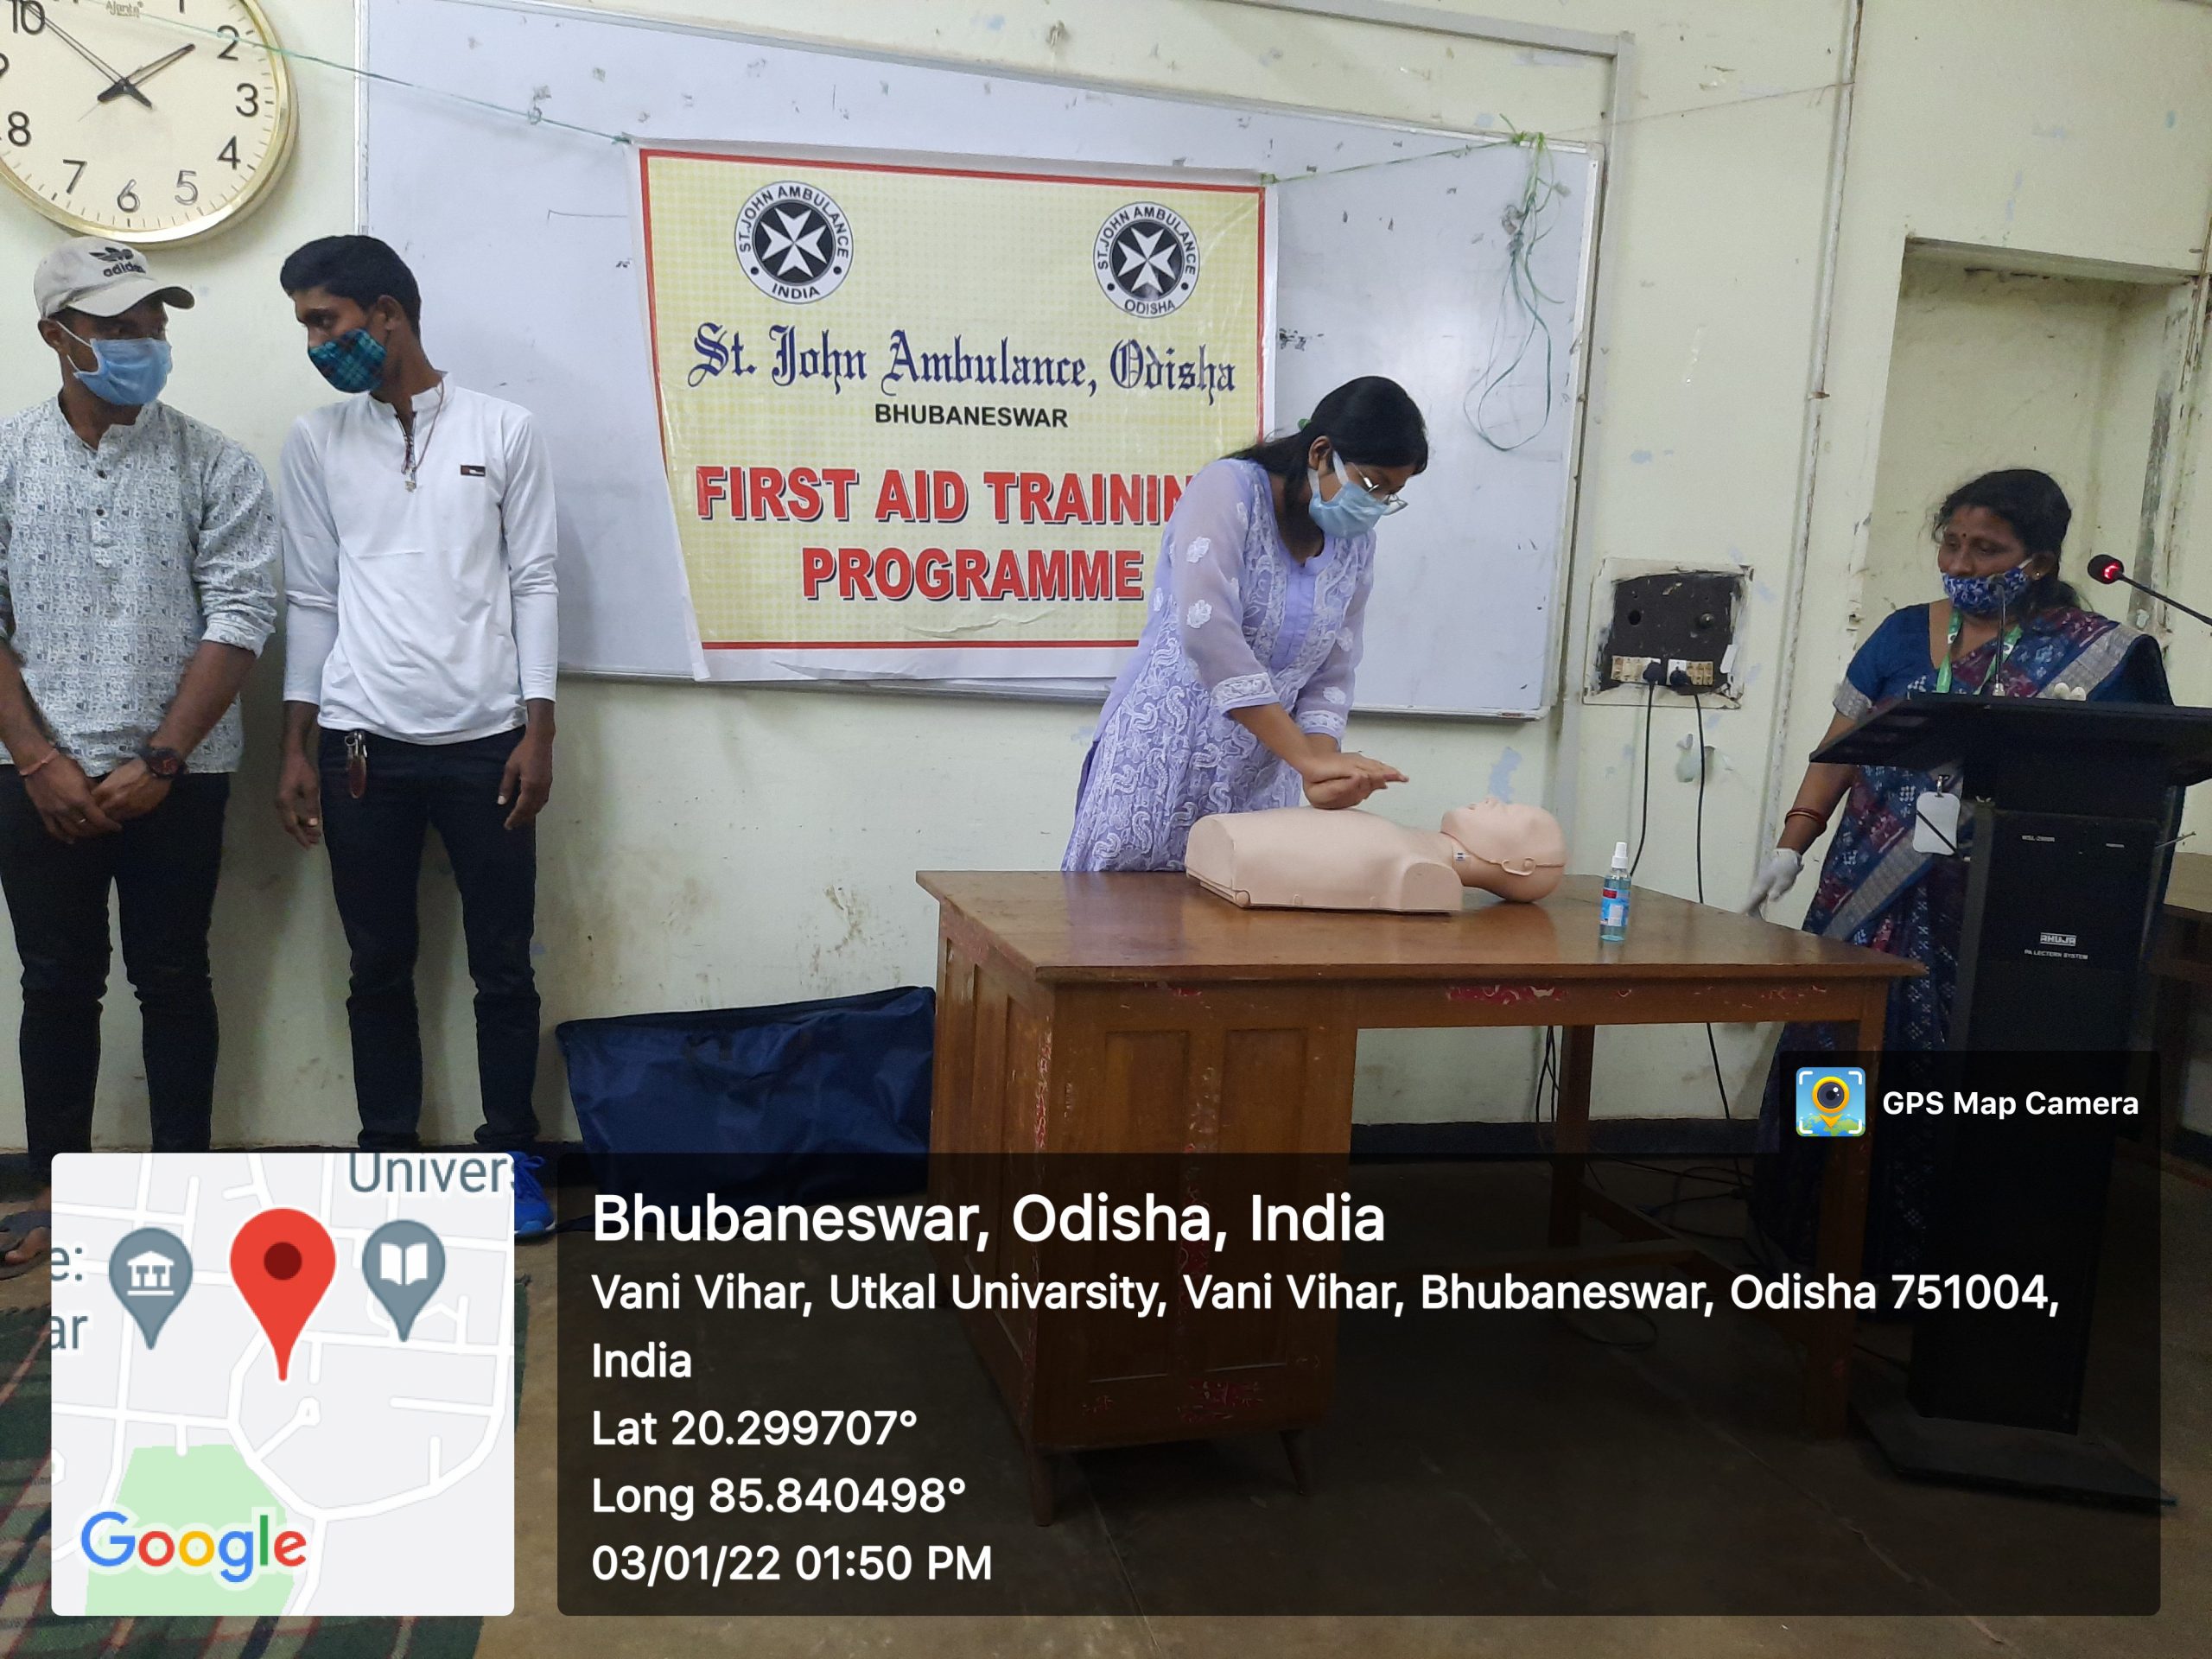 FIRST AID TRAINING PROGRAMME